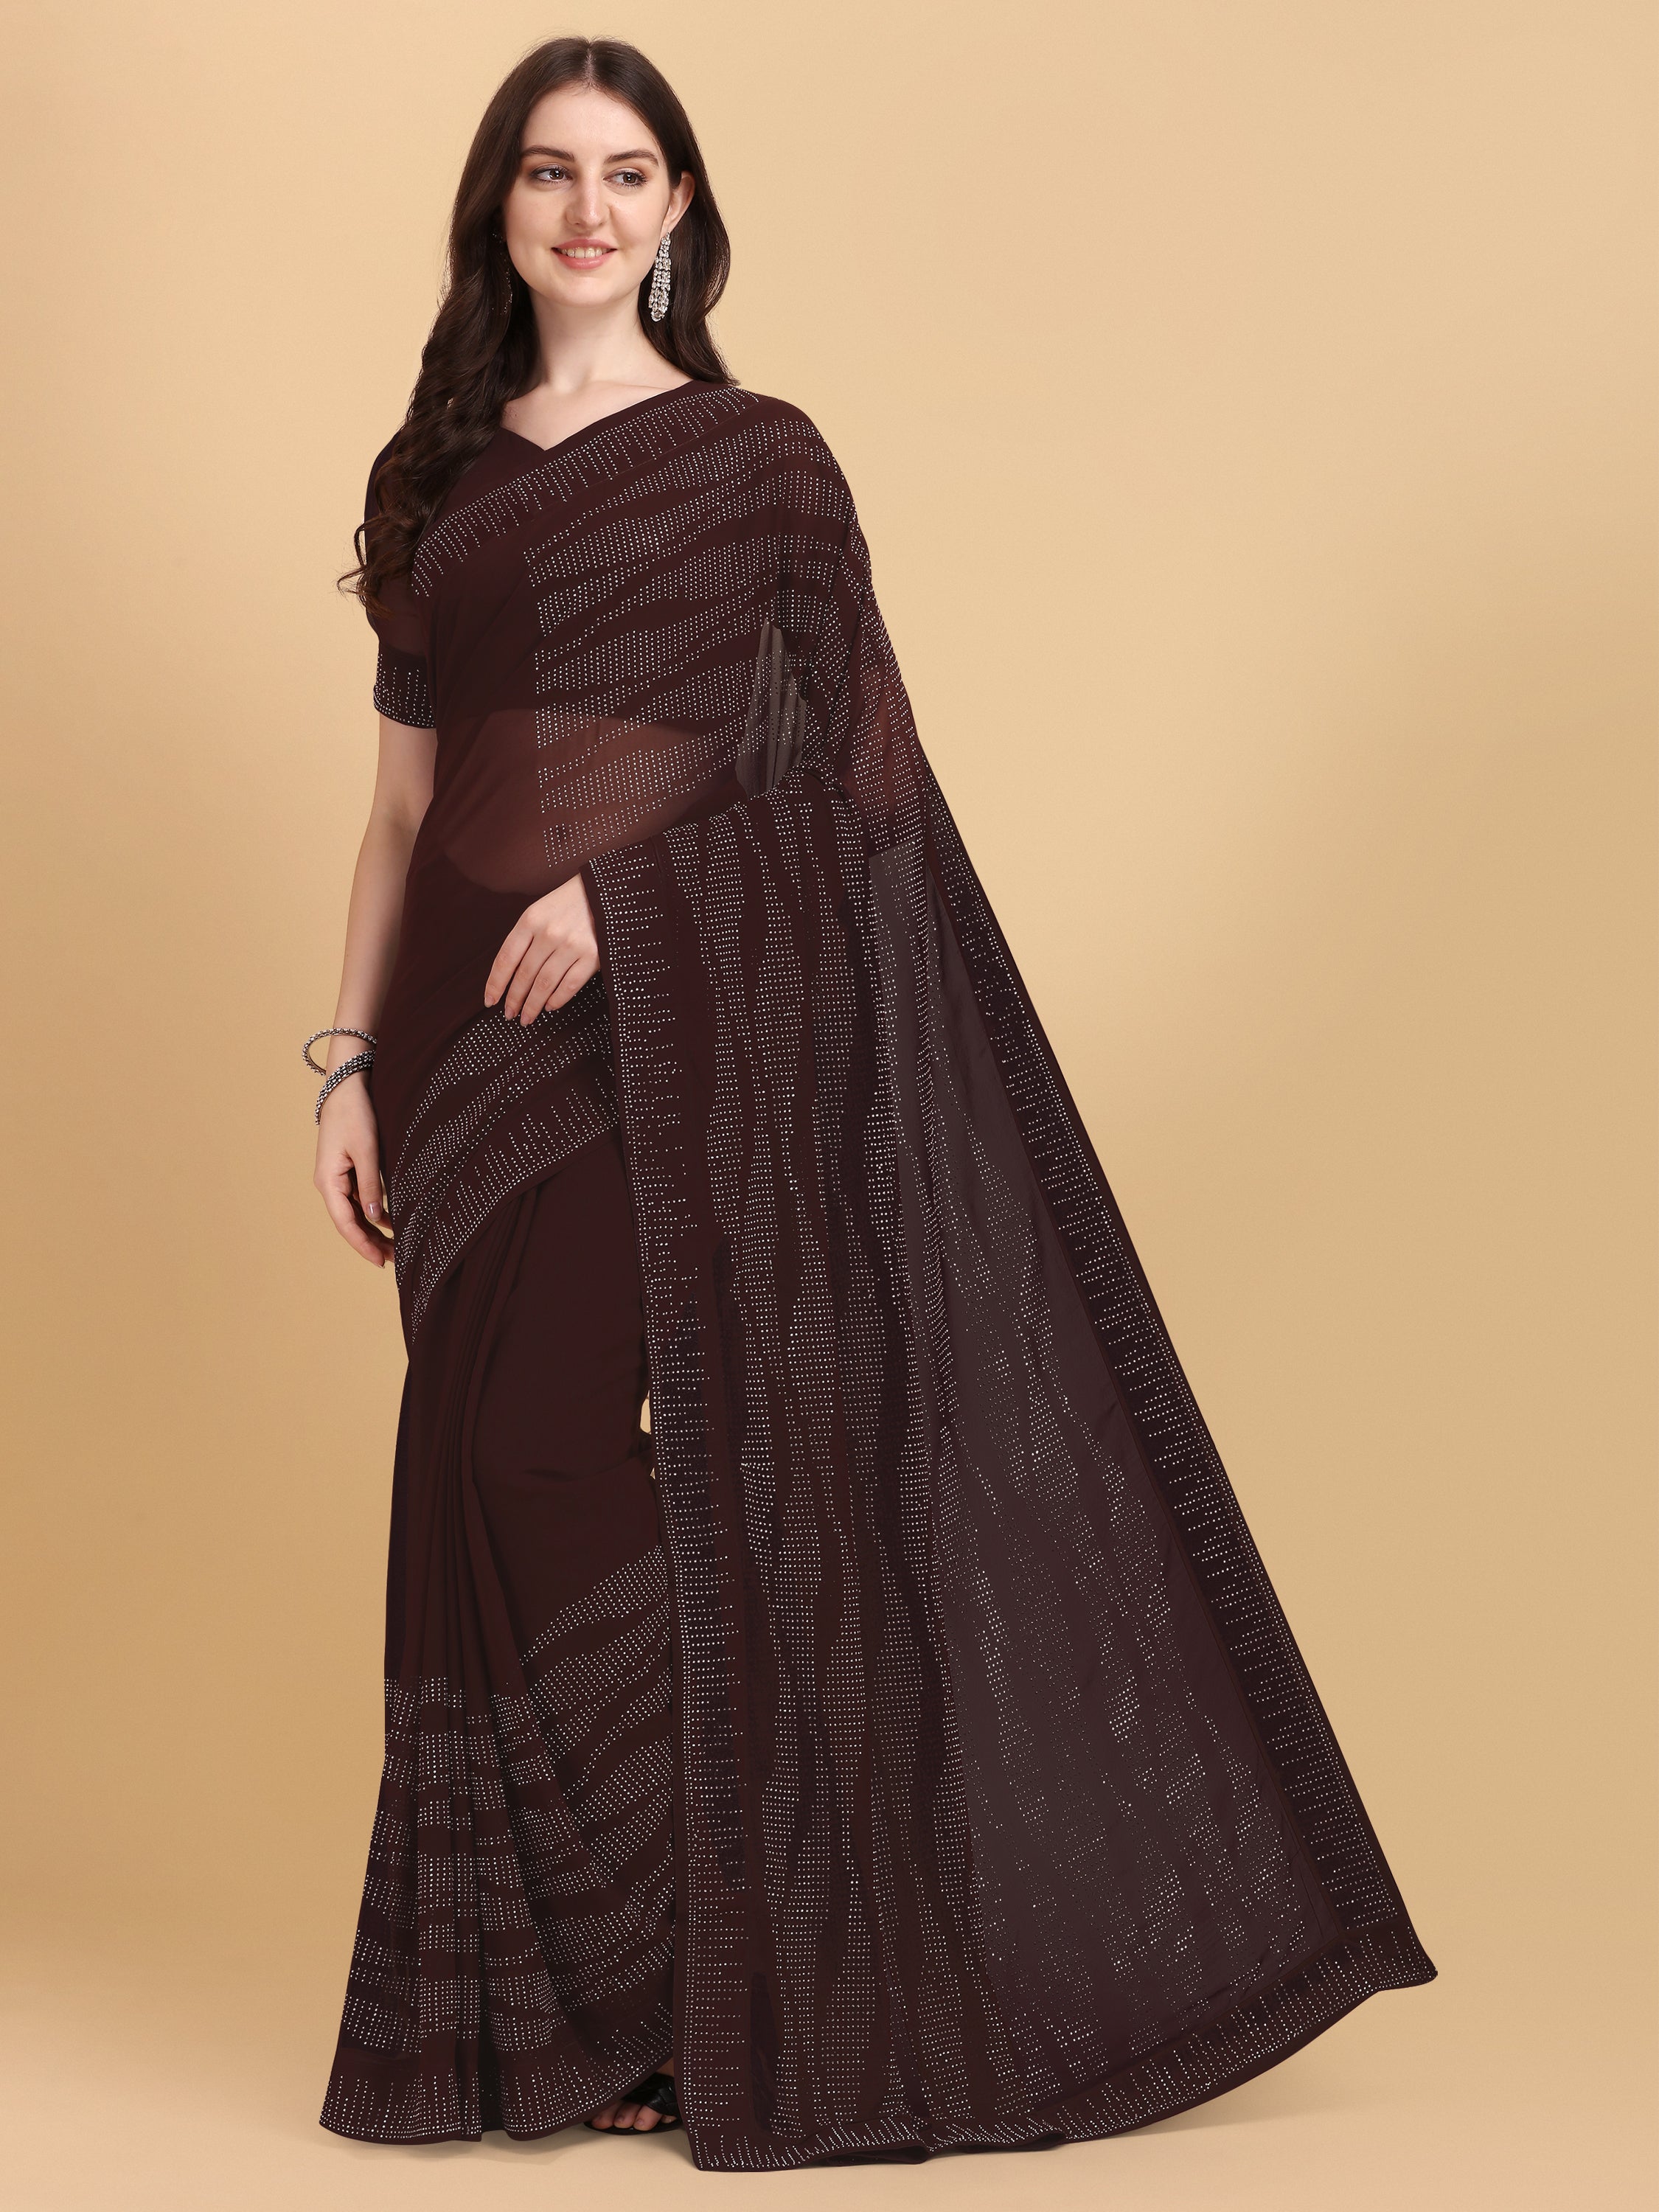 Women's Emblishment Occasion Wear Georgette Saree With Blouse Piece (Coffee Brown) - NIMIDHYA